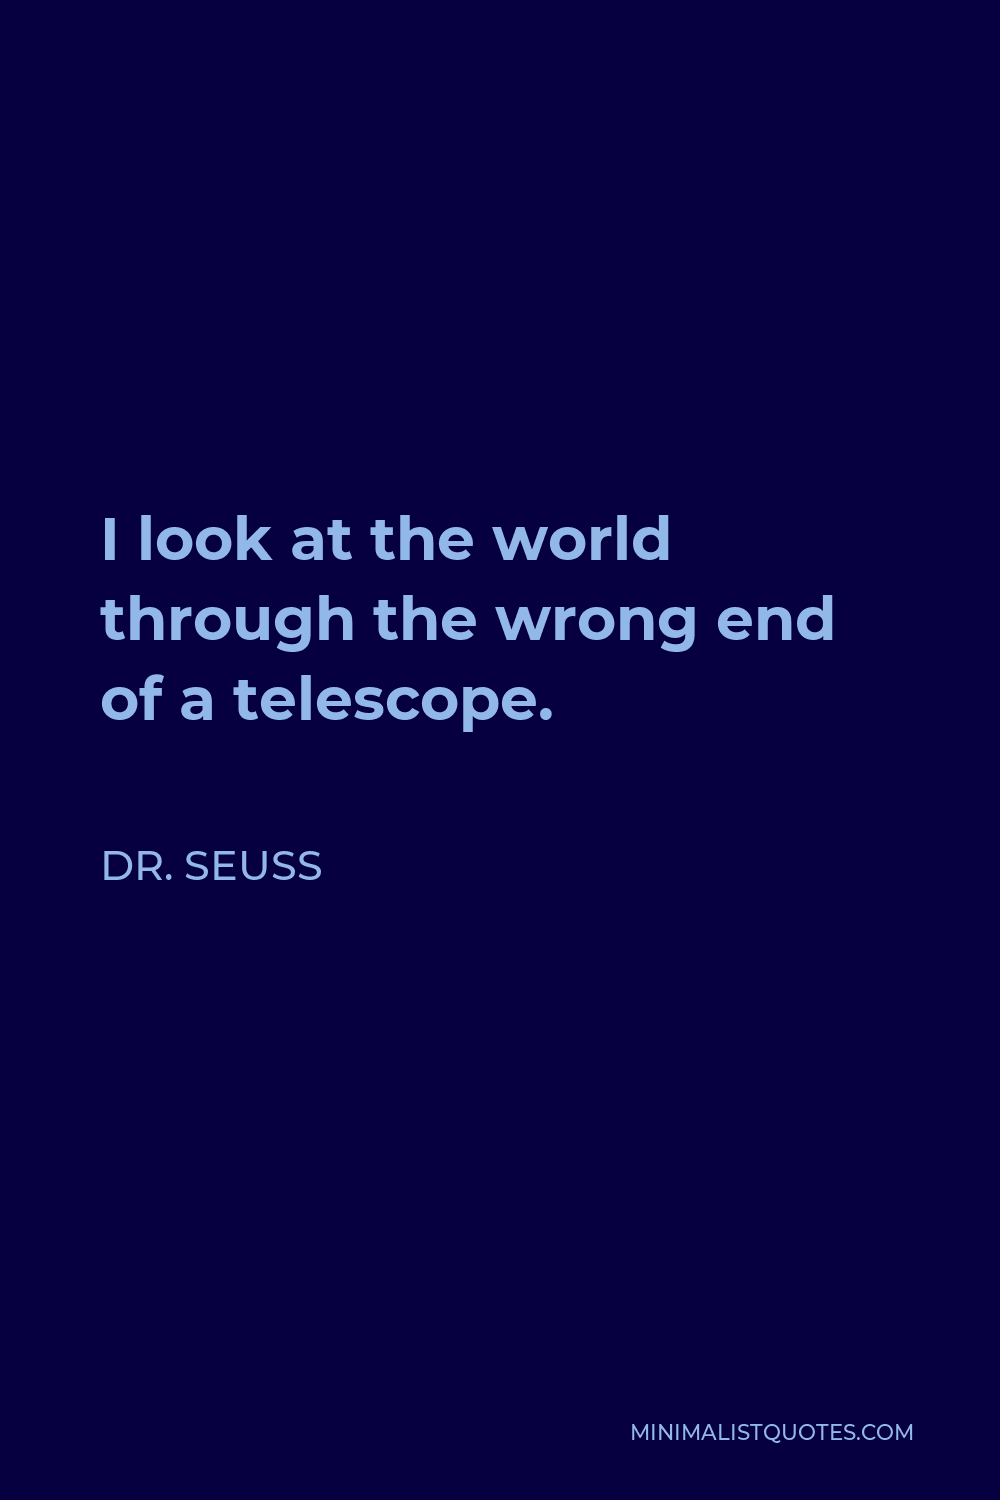 Dr. Seuss Quote - I look at the world through the wrong end of a telescope.